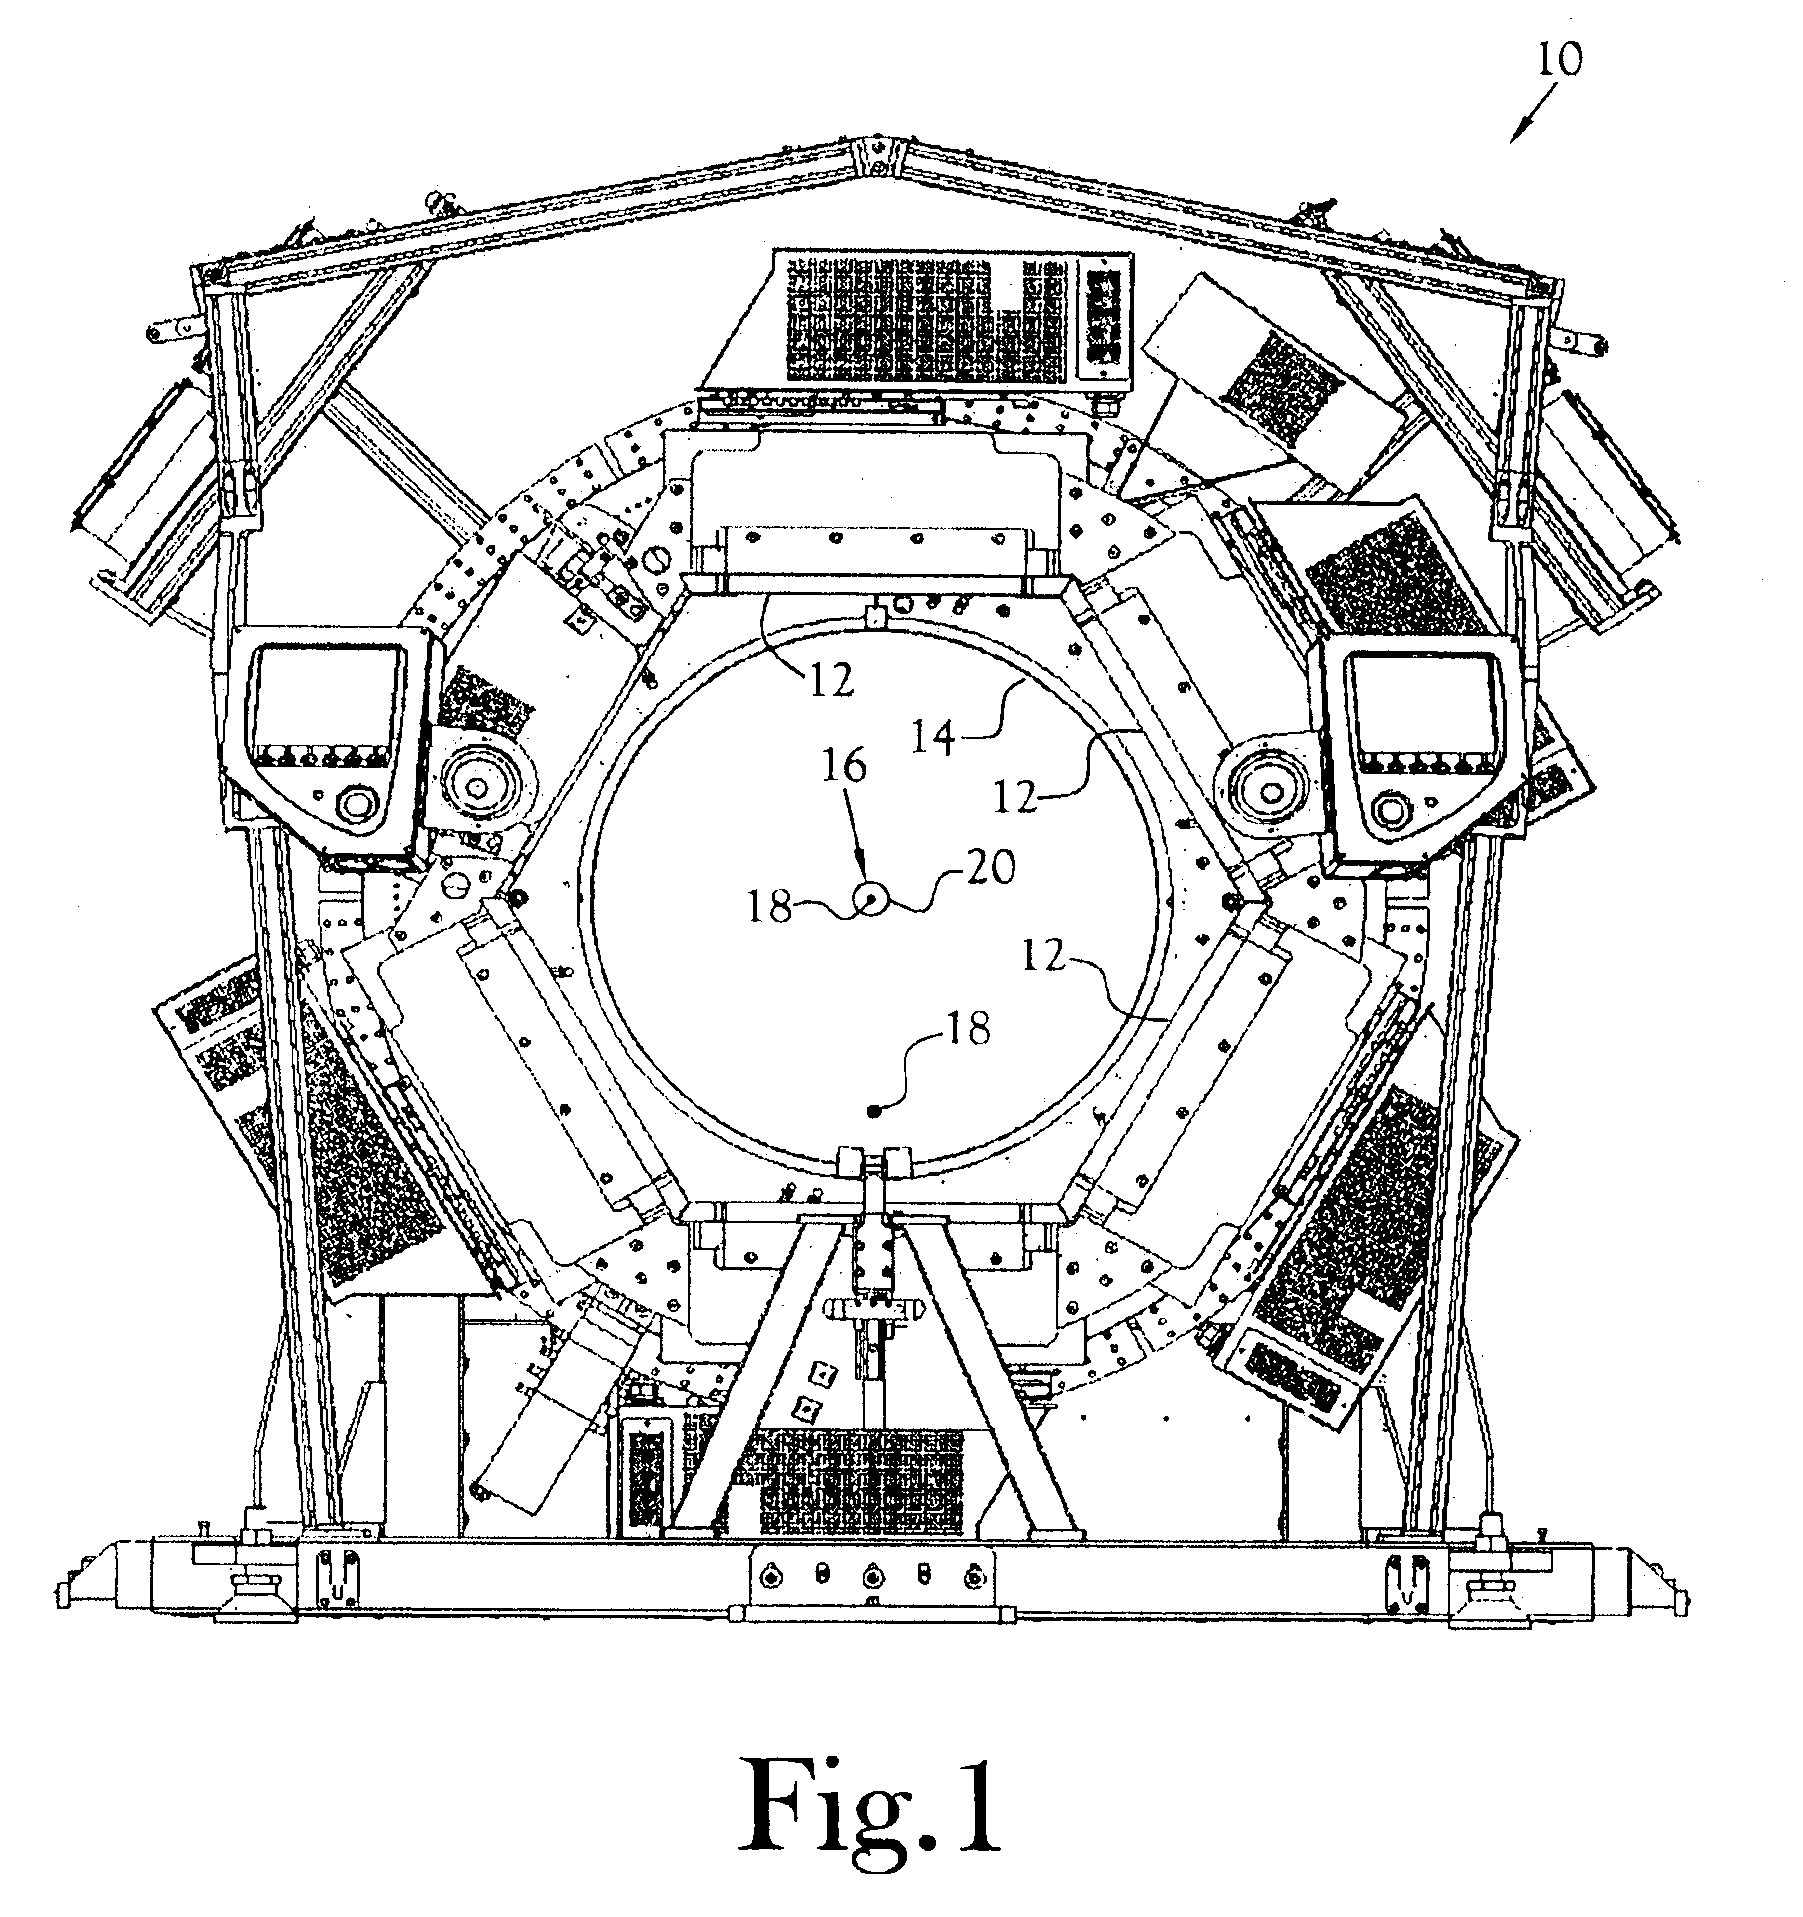 Normalization apparatus for panel detector PET scanners